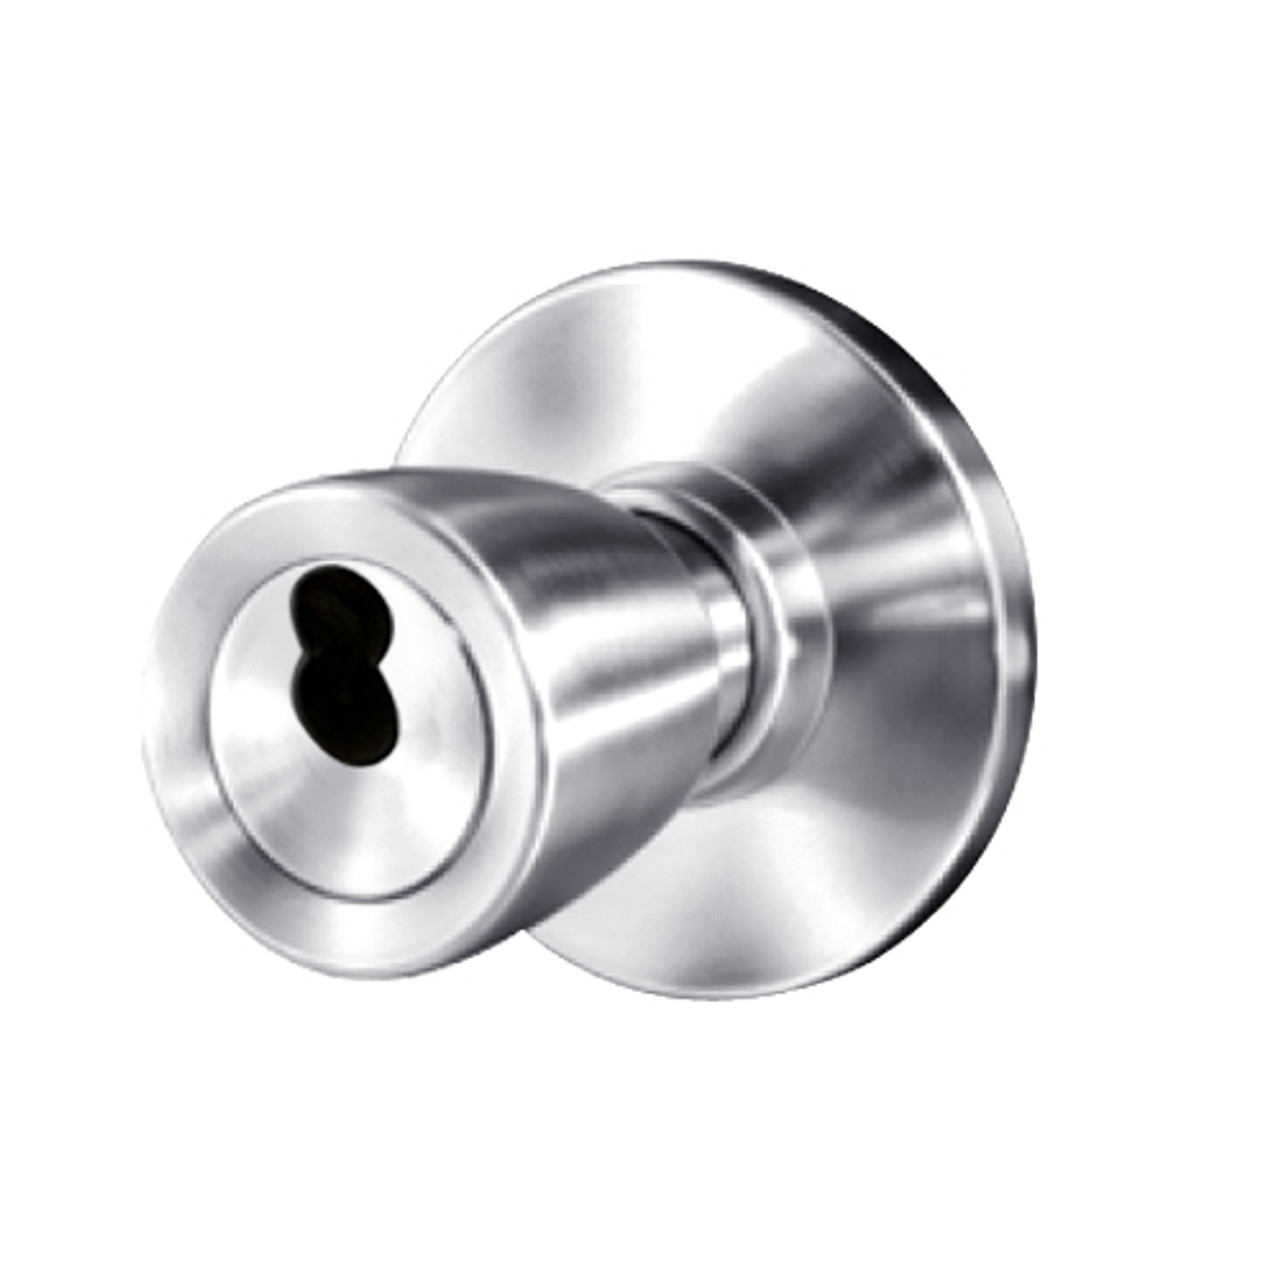 8K37C6AS3625 Best 8K Series Apartment Heavy Duty Cylindrical Knob Locks with Tulip Style in Bright Chrome